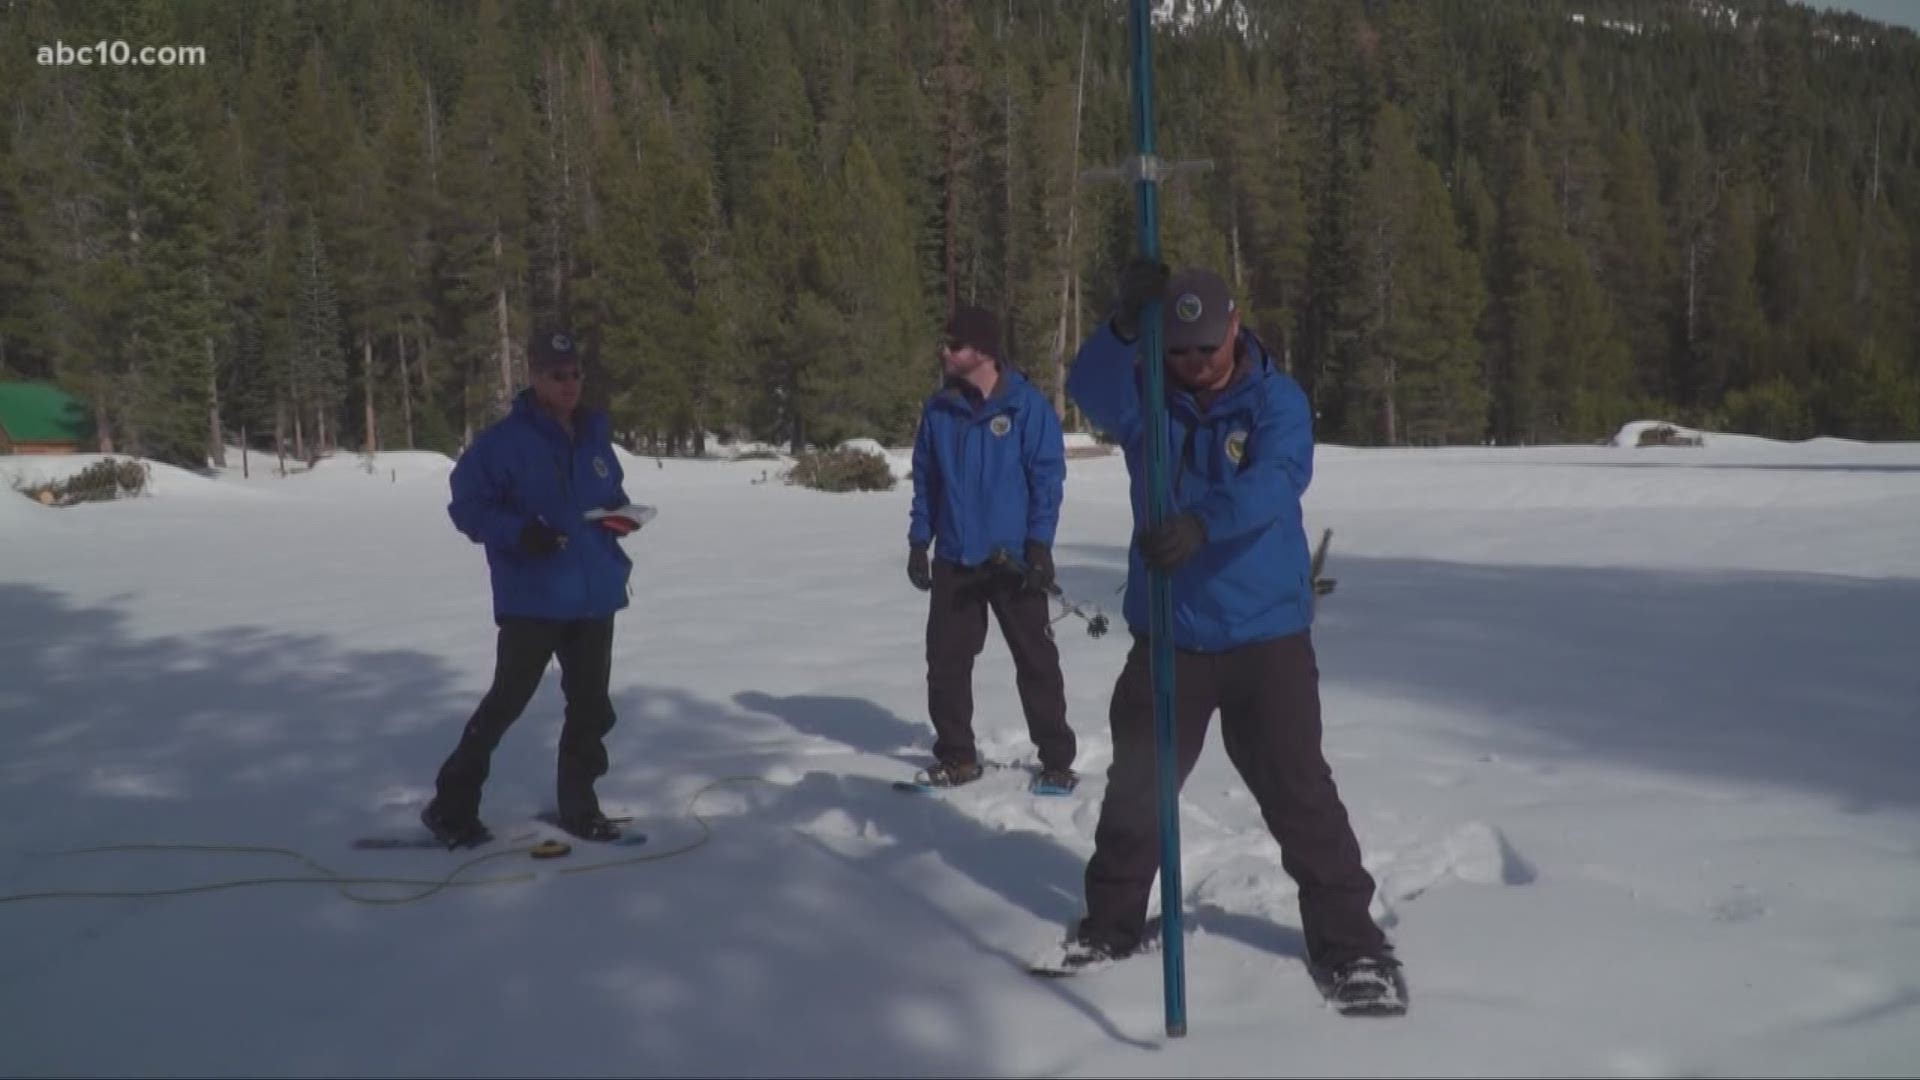 A dry January found the snowpack survey at 40.5 inches deep with a water content of 14.5 inches.